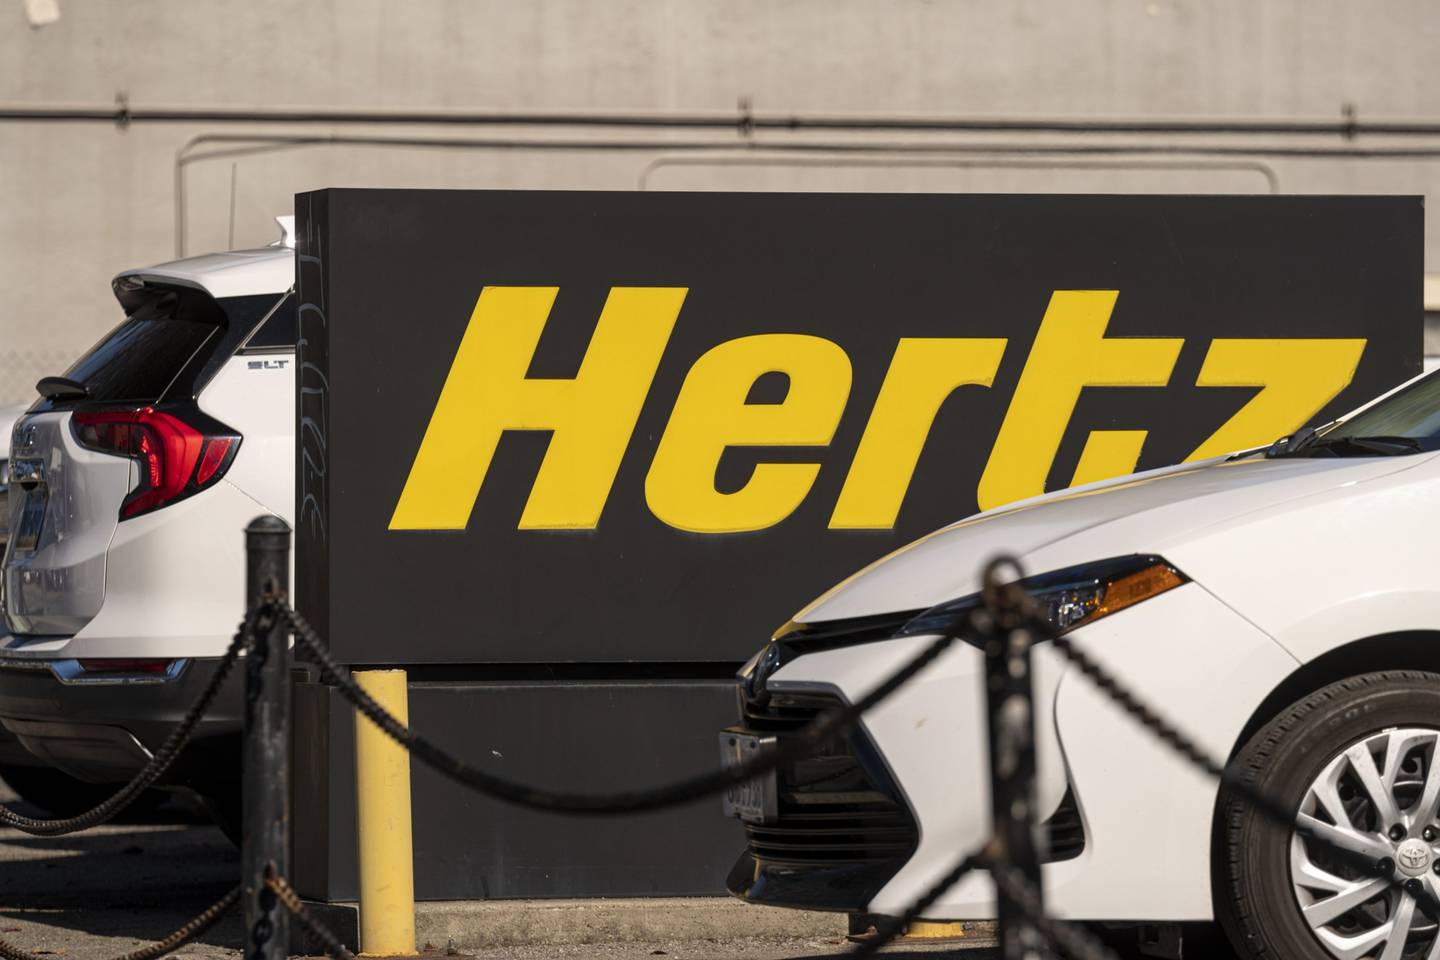 Last year, Uber announced a partnership with Hertz to make up to 50,000 Tesla vehicles available for drivers to rent by 2023. Bloomberg